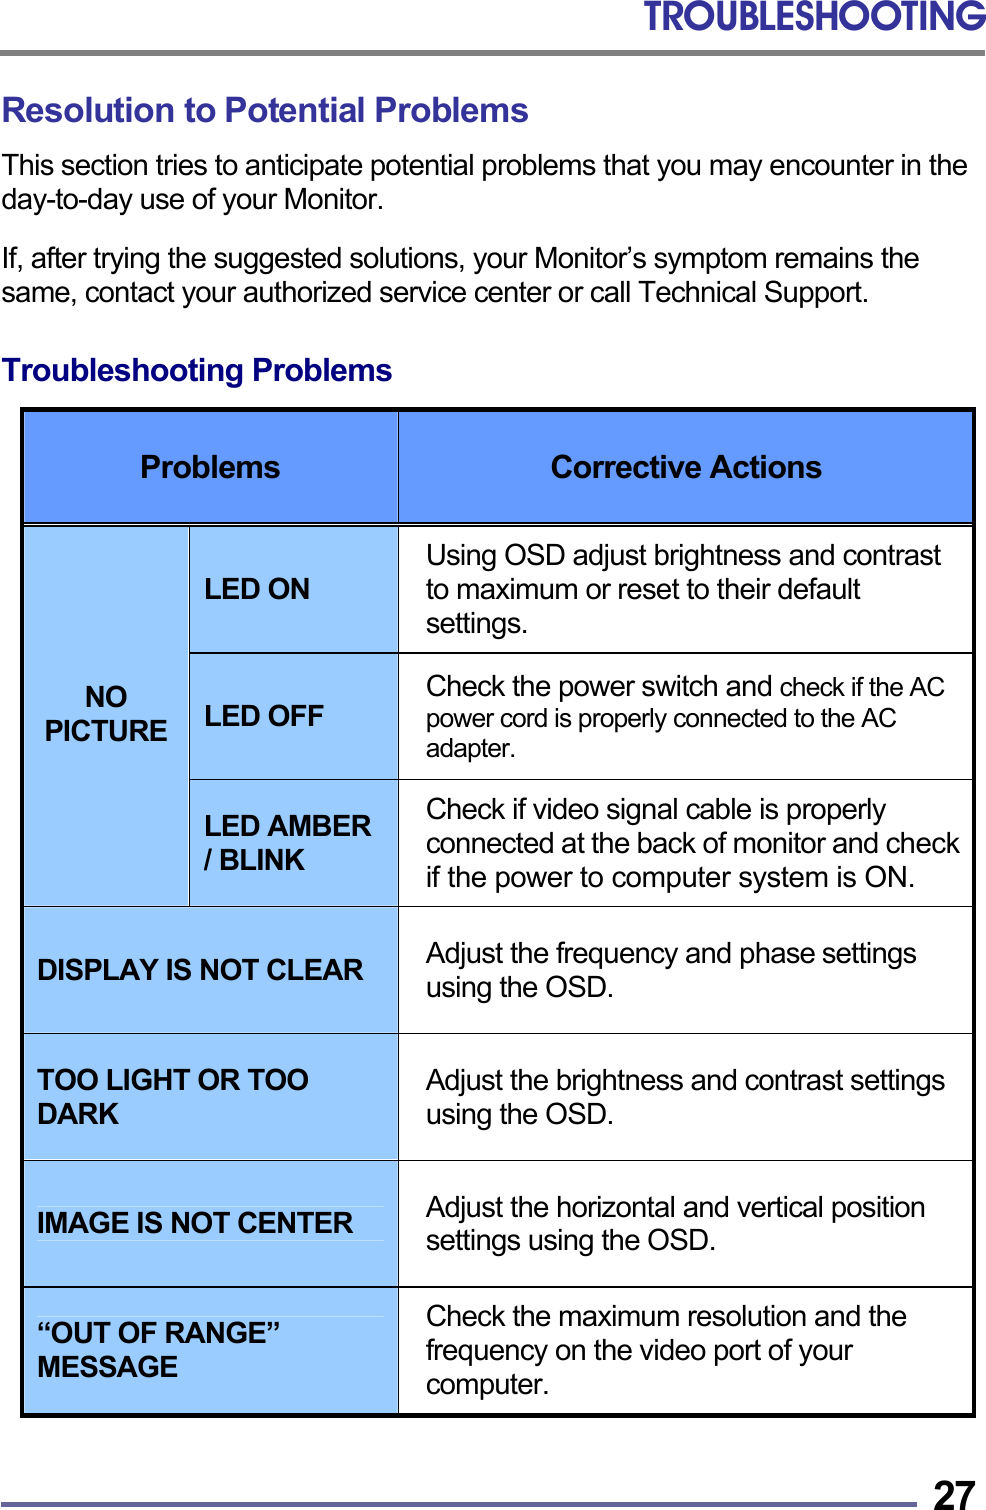 TROUBLESHOOTING   27Resolution to Potential Problems This section tries to anticipate potential problems that you may encounter in the day-to-day use of your Monitor.  If, after trying the suggested solutions, your Monitor’s symptom remains the same, contact your authorized service center or call Technical Support.  Troubleshooting Problems  Problems  Corrective Actions LED ON Using OSD adjust brightness and contrast to maximum or reset to their default settings. LED OFF Check the power switch and check if the AC power cord is properly connected to the AC adapter. NO PICTURE LED AMBER / BLINK Check if video signal cable is properly connected at the back of monitor and check if the power to computer system is ON. DISPLAY IS NOT CLEAR  Adjust the frequency and phase settings using the OSD. TOO LIGHT OR TOO DARK Adjust the brightness and contrast settings using the OSD. IMAGE IS NOT CENTER  Adjust the horizontal and vertical position settings using the OSD. “OUT OF RANGE” MESSAGE Check the maximum resolution and the frequency on the video port of your computer.  